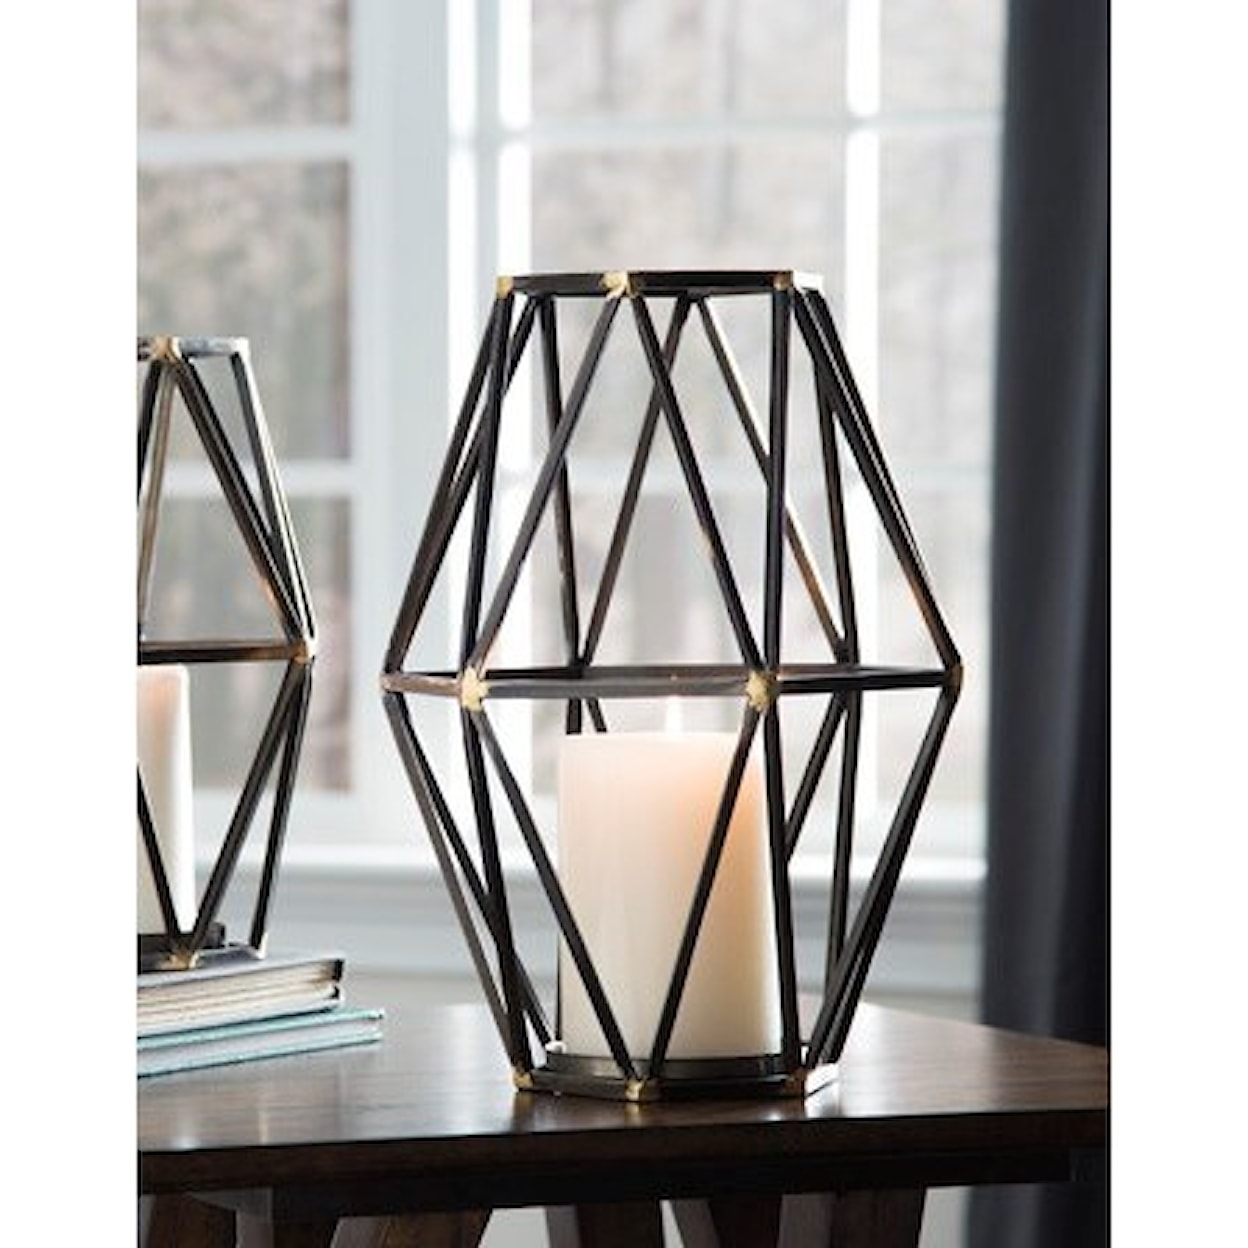 Signature Design by Ashley Accents Devo Candle Holder